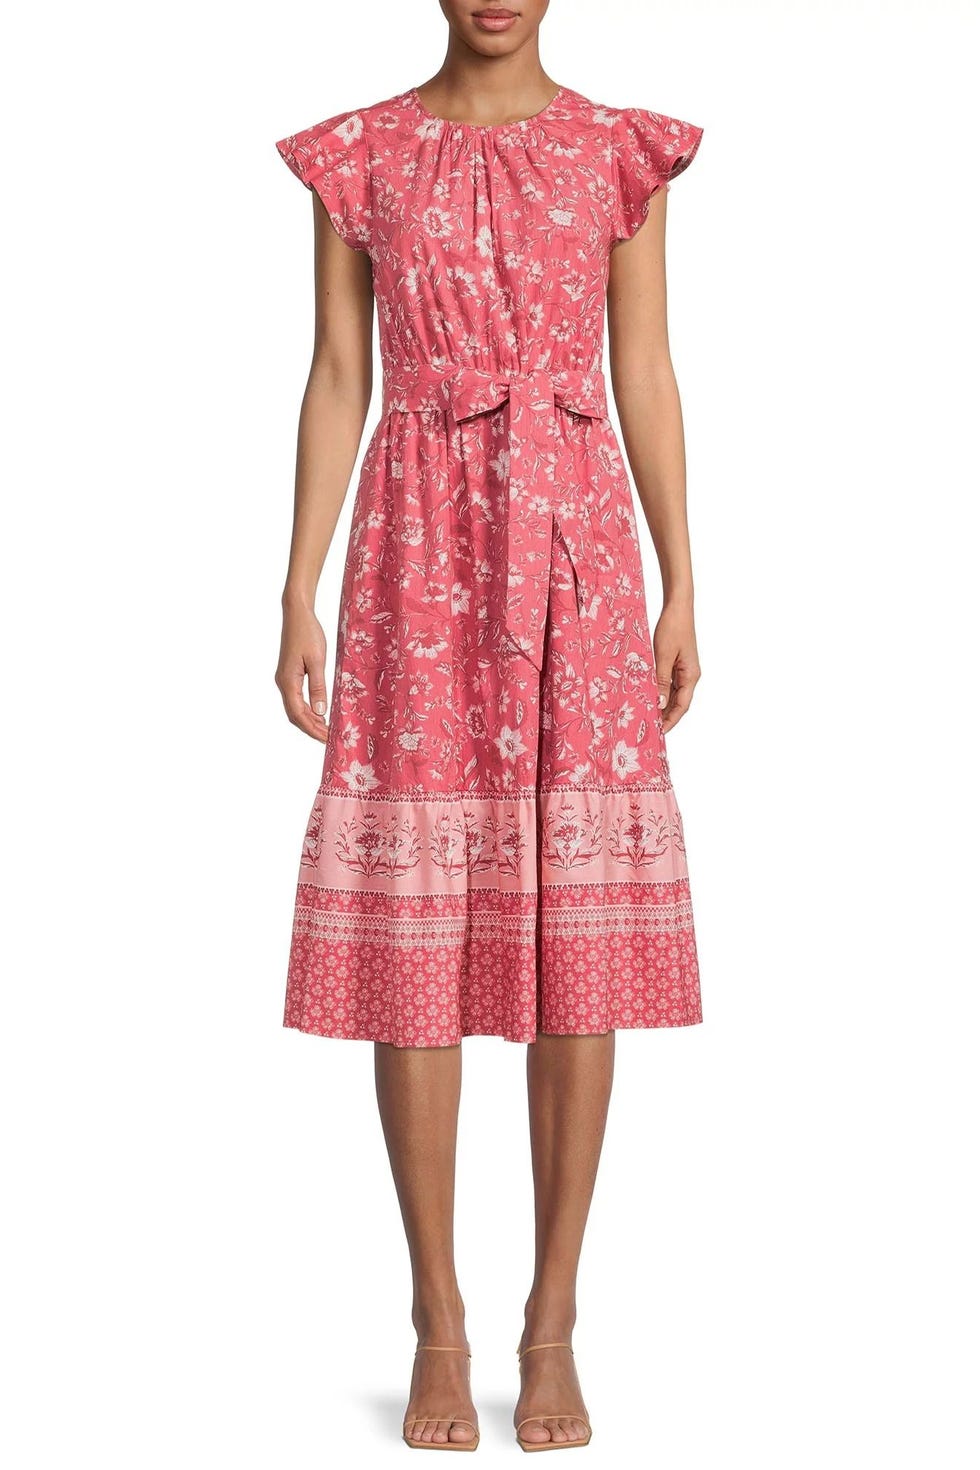 Time and Tru Women's Printed Midi Dress with Flutter Sleeves